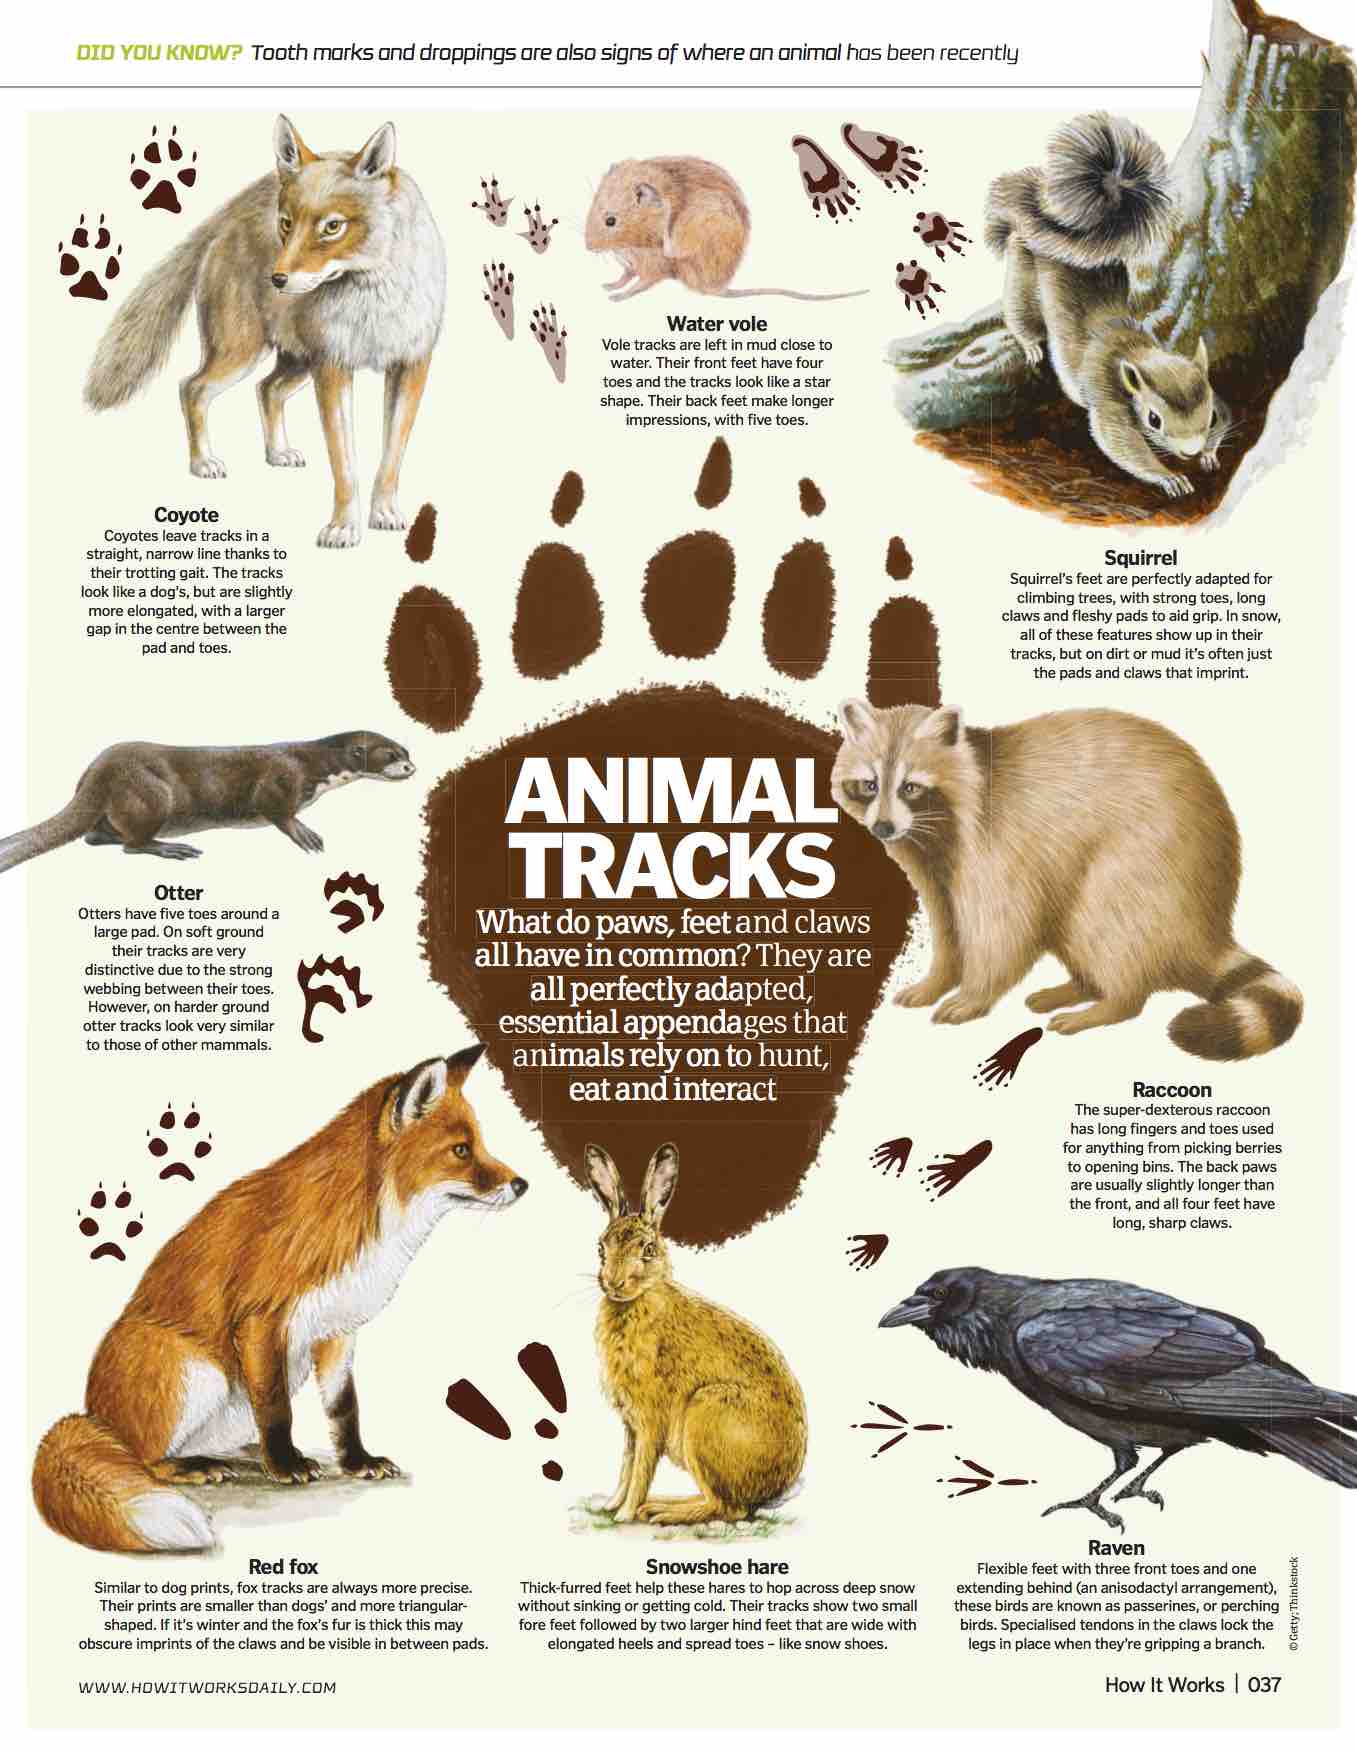 Animal Tracks - What do paws, feet and claws have in common? – How It Works